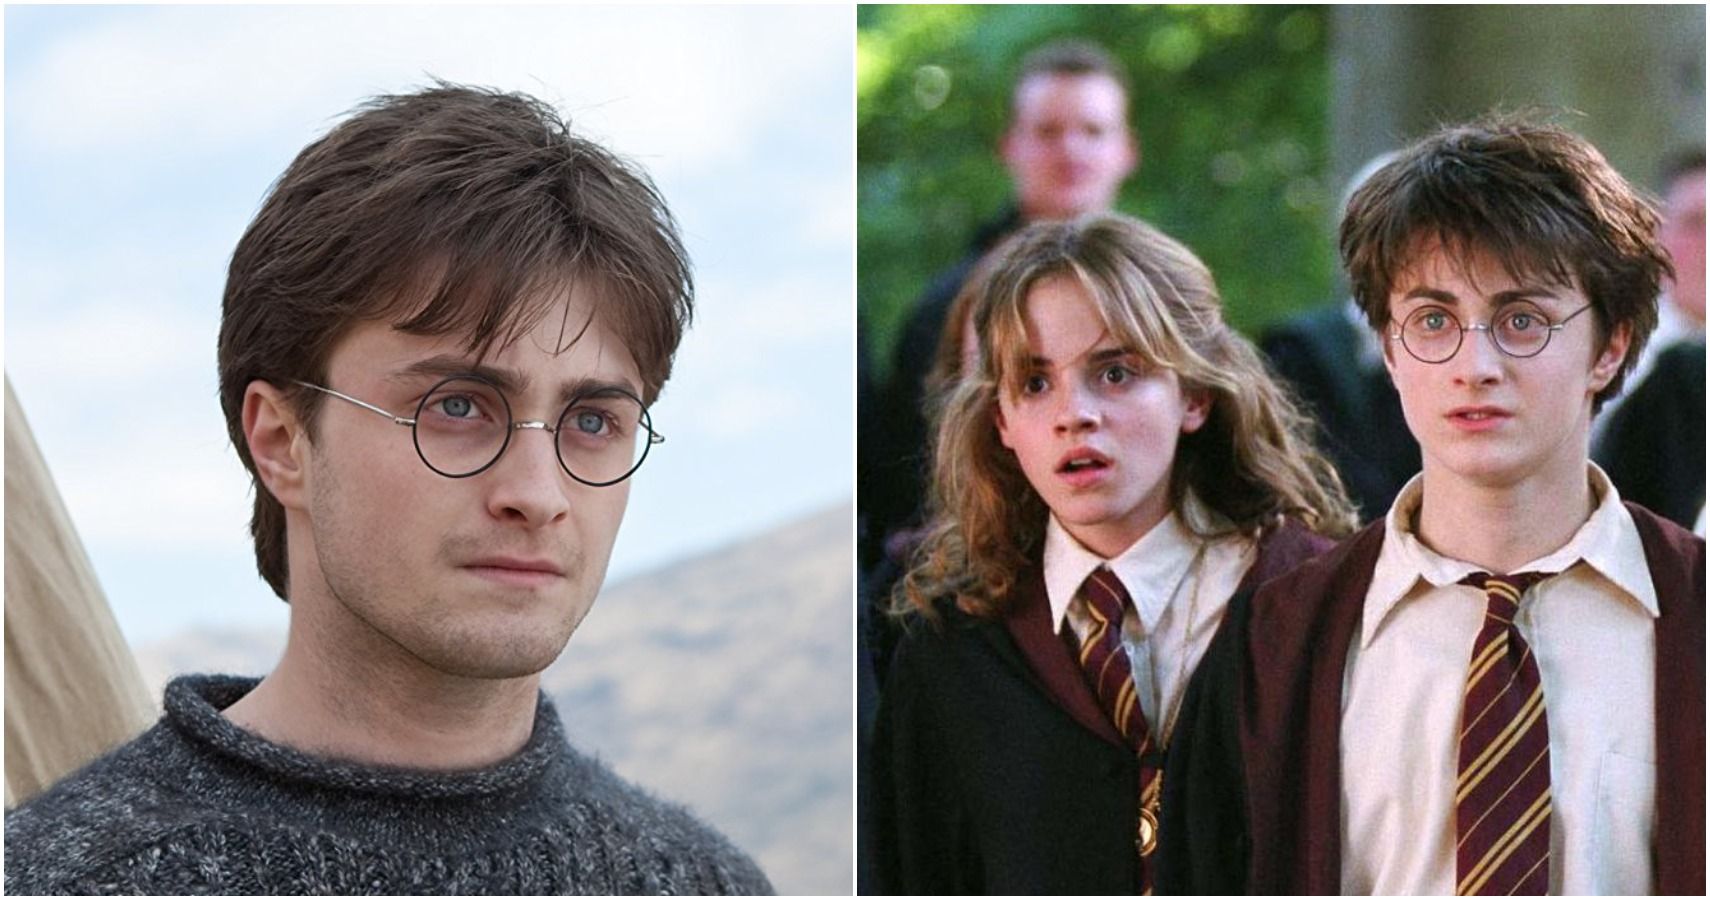 Harry Potter 5 Things The Films Got Right About Harry (& 5 They Got Wrong)